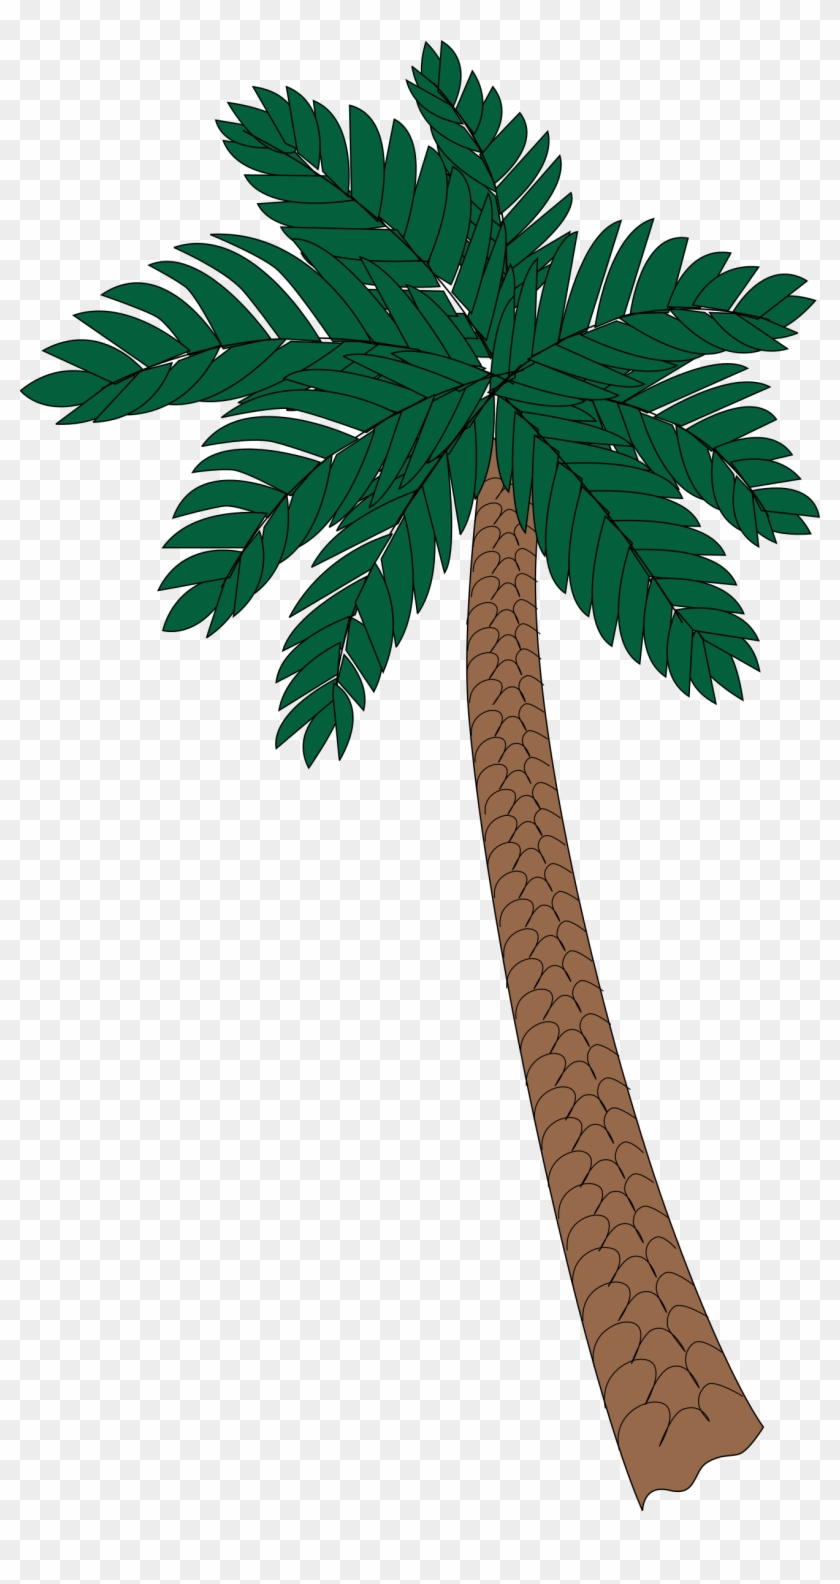 This Free Icons Png Design Of Palm Tree 2 Clipart #1733550